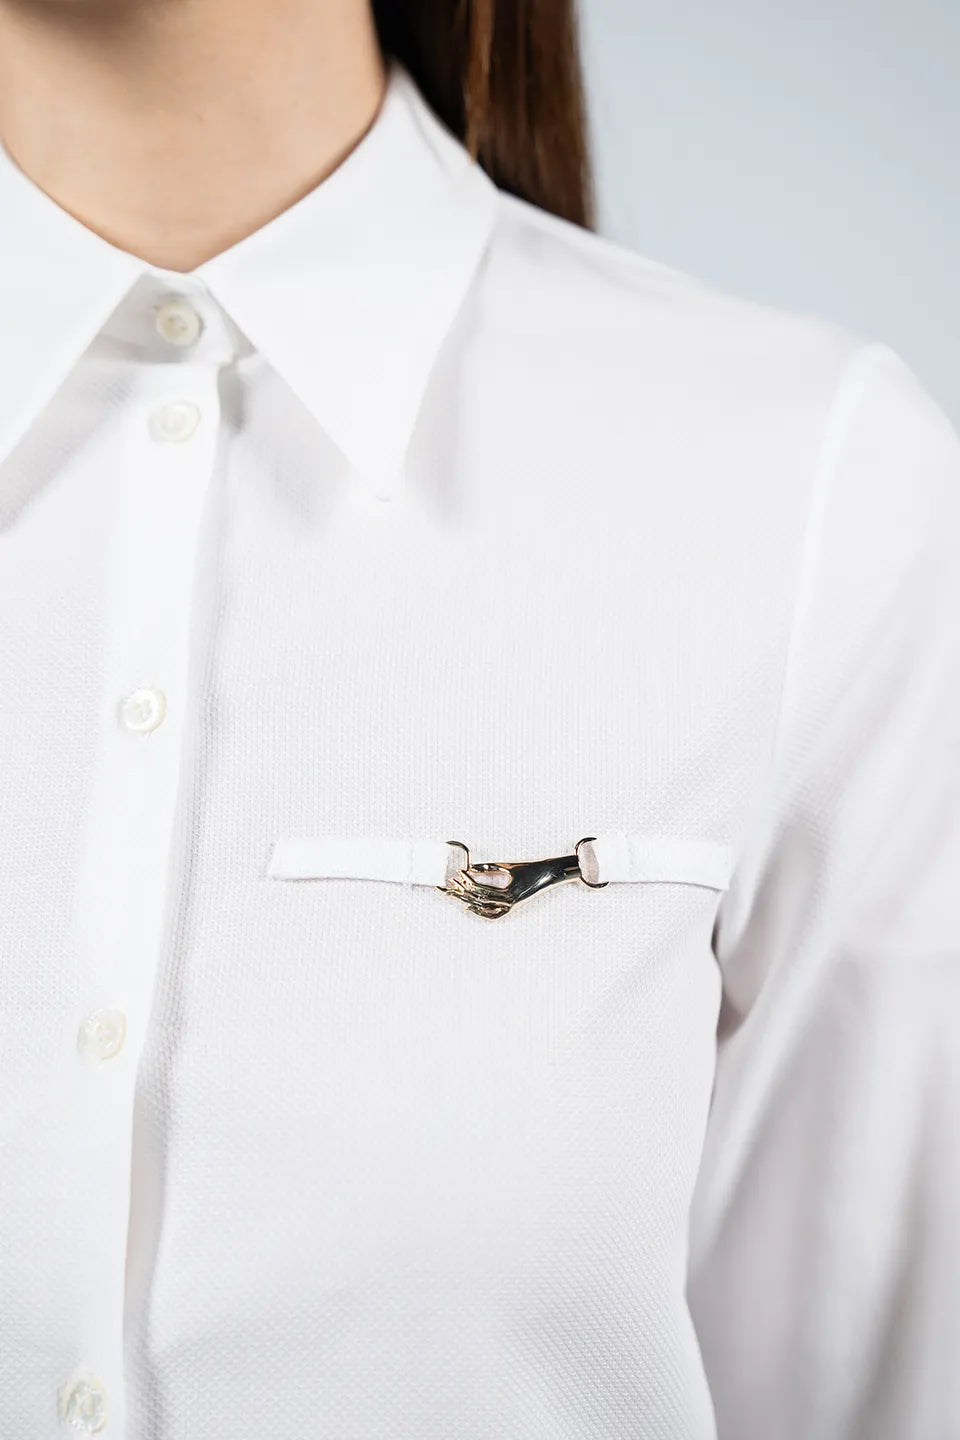 Designer White Shirt, shop online with free delivery in UAE. Product gallery 5